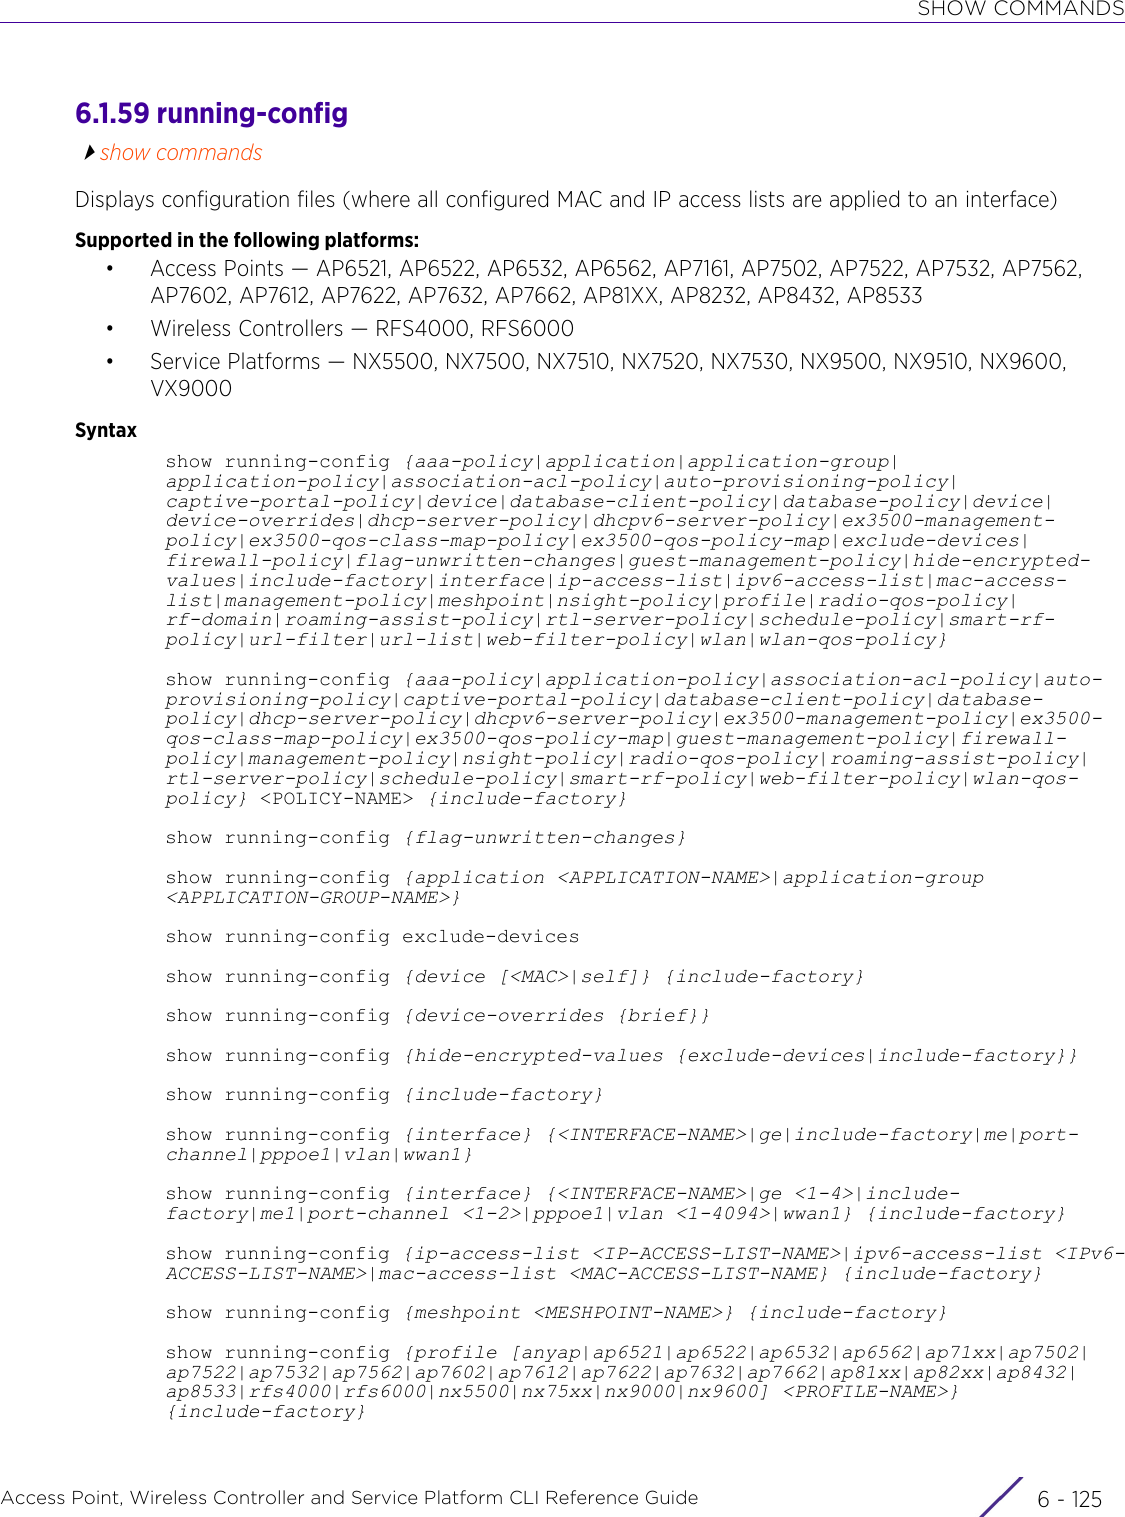 SHOW COMMANDSAccess Point, Wireless Controller and Service Platform CLI Reference Guide 6 - 1256.1.59 running-configshow commandsDisplays configuration files (where all configured MAC and IP access lists are applied to an interface)Supported in the following platforms:• Access Points — AP6521, AP6522, AP6532, AP6562, AP7161, AP7502, AP7522, AP7532, AP7562, AP7602, AP7612, AP7622, AP7632, AP7662, AP81XX, AP8232, AP8432, AP8533• Wireless Controllers — RFS4000, RFS6000• Service Platforms — NX5500, NX7500, NX7510, NX7520, NX7530, NX9500, NX9510, NX9600, VX9000Syntaxshow running-config {aaa-policy|application|application-group|application-policy|association-acl-policy|auto-provisioning-policy|captive-portal-policy|device|database-client-policy|database-policy|device|device-overrides|dhcp-server-policy|dhcpv6-server-policy|ex3500-management-policy|ex3500-qos-class-map-policy|ex3500-qos-policy-map|exclude-devices|firewall-policy|flag-unwritten-changes|guest-management-policy|hide-encrypted-values|include-factory|interface|ip-access-list|ipv6-access-list|mac-access-list|management-policy|meshpoint|nsight-policy|profile|radio-qos-policy|rf-domain|roaming-assist-policy|rtl-server-policy|schedule-policy|smart-rf-policy|url-filter|url-list|web-filter-policy|wlan|wlan-qos-policy}show running-config {aaa-policy|application-policy|association-acl-policy|auto-provisioning-policy|captive-portal-policy|database-client-policy|database-policy|dhcp-server-policy|dhcpv6-server-policy|ex3500-management-policy|ex3500-qos-class-map-policy|ex3500-qos-policy-map|guest-management-policy|firewall-policy|management-policy|nsight-policy|radio-qos-policy|roaming-assist-policy|rtl-server-policy|schedule-policy|smart-rf-policy|web-filter-policy|wlan-qos-policy} &lt;POLICY-NAME&gt; {include-factory}show running-config {flag-unwritten-changes}show running-config {application &lt;APPLICATION-NAME&gt;|application-group &lt;APPLICATION-GROUP-NAME&gt;}show running-config exclude-devicesshow running-config {device [&lt;MAC&gt;|self]} {include-factory}show running-config {device-overrides {brief}}show running-config {hide-encrypted-values {exclude-devices|include-factory}}show running-config {include-factory}show running-config {interface} {&lt;INTERFACE-NAME&gt;|ge|include-factory|me|port-channel|pppoe1|vlan|wwan1}show running-config {interface} {&lt;INTERFACE-NAME&gt;|ge &lt;1-4&gt;|include-factory|me1|port-channel &lt;1-2&gt;|pppoe1|vlan &lt;1-4094&gt;|wwan1} {include-factory}show running-config {ip-access-list &lt;IP-ACCESS-LIST-NAME&gt;|ipv6-access-list &lt;IPv6-ACCESS-LIST-NAME&gt;|mac-access-list &lt;MAC-ACCESS-LIST-NAME} {include-factory}show running-config {meshpoint &lt;MESHPOINT-NAME&gt;} {include-factory}show running-config {profile [anyap|ap6521|ap6522|ap6532|ap6562|ap71xx|ap7502|ap7522|ap7532|ap7562|ap7602|ap7612|ap7622|ap7632|ap7662|ap81xx|ap82xx|ap8432|ap8533|rfs4000|rfs6000|nx5500|nx75xx|nx9000|nx9600] &lt;PROFILE-NAME&gt;} {include-factory}